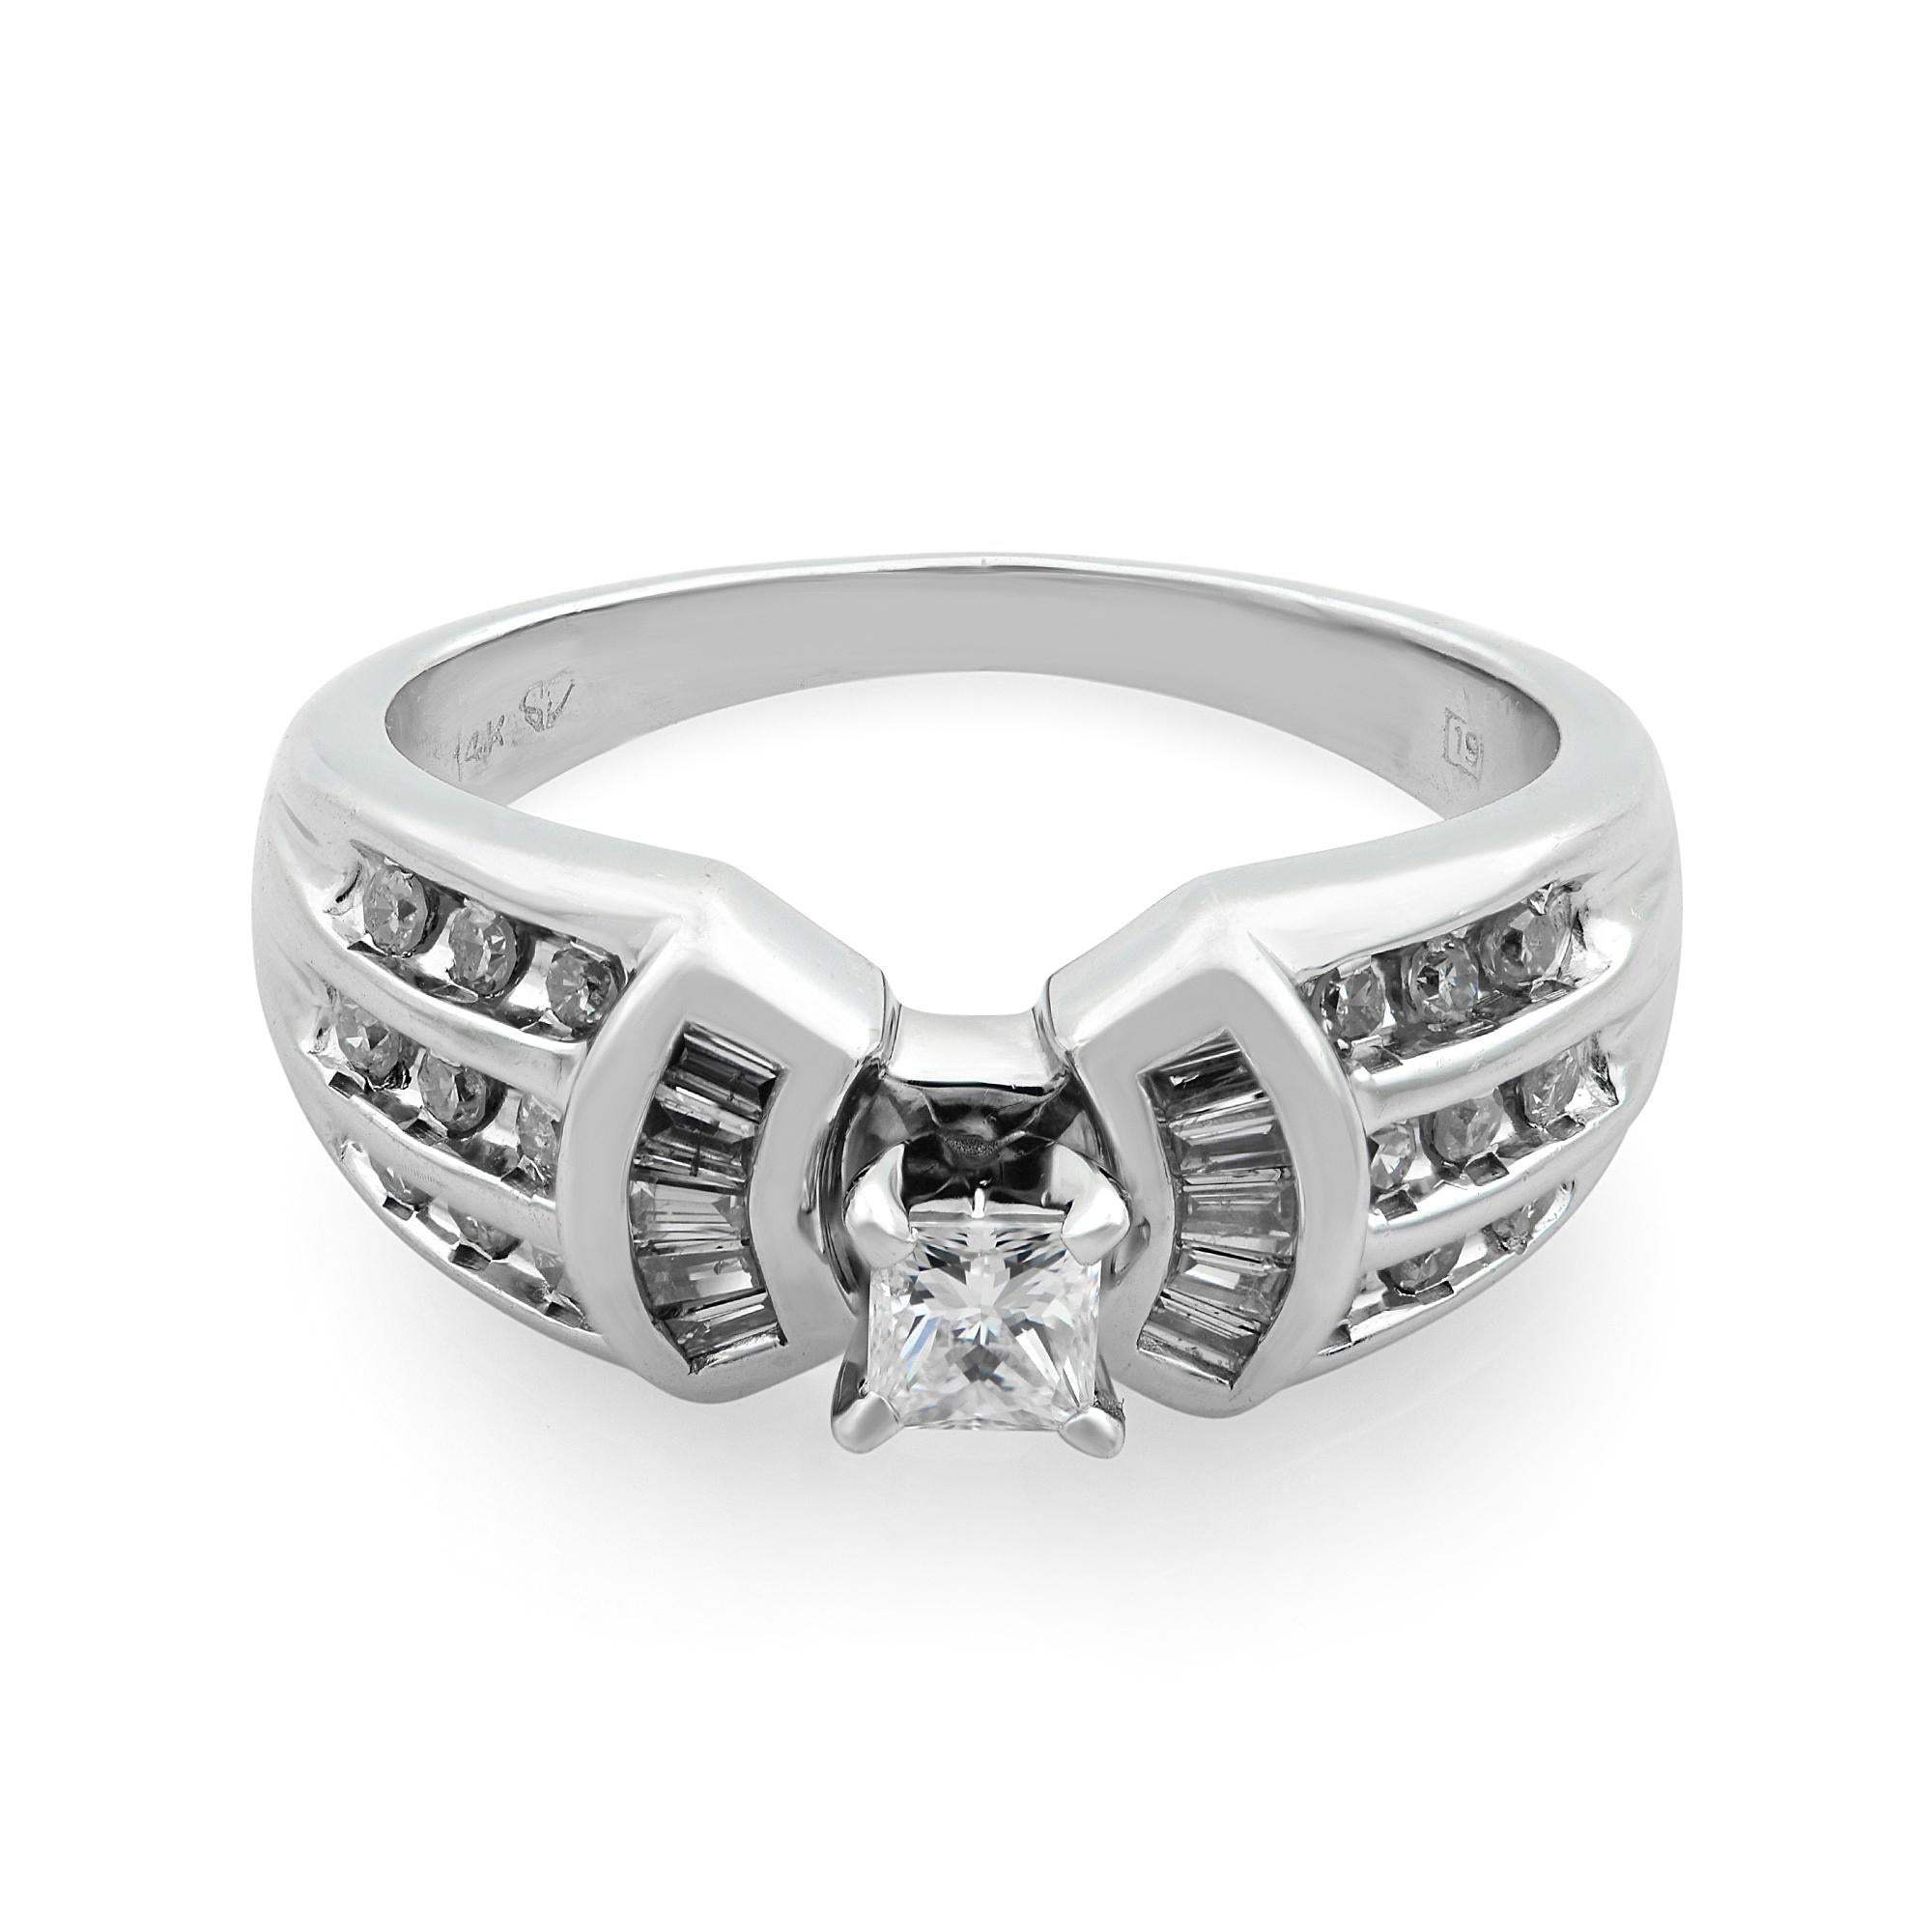 This beautiful ladies wedding ring is crafted in 14k white gold. It features a center prong set princess cut diamond with baguette and round cut diamonds on each side. Total diamond weight: 0.75 carat. Diamond quality: H color and SI2 clarity. Ring